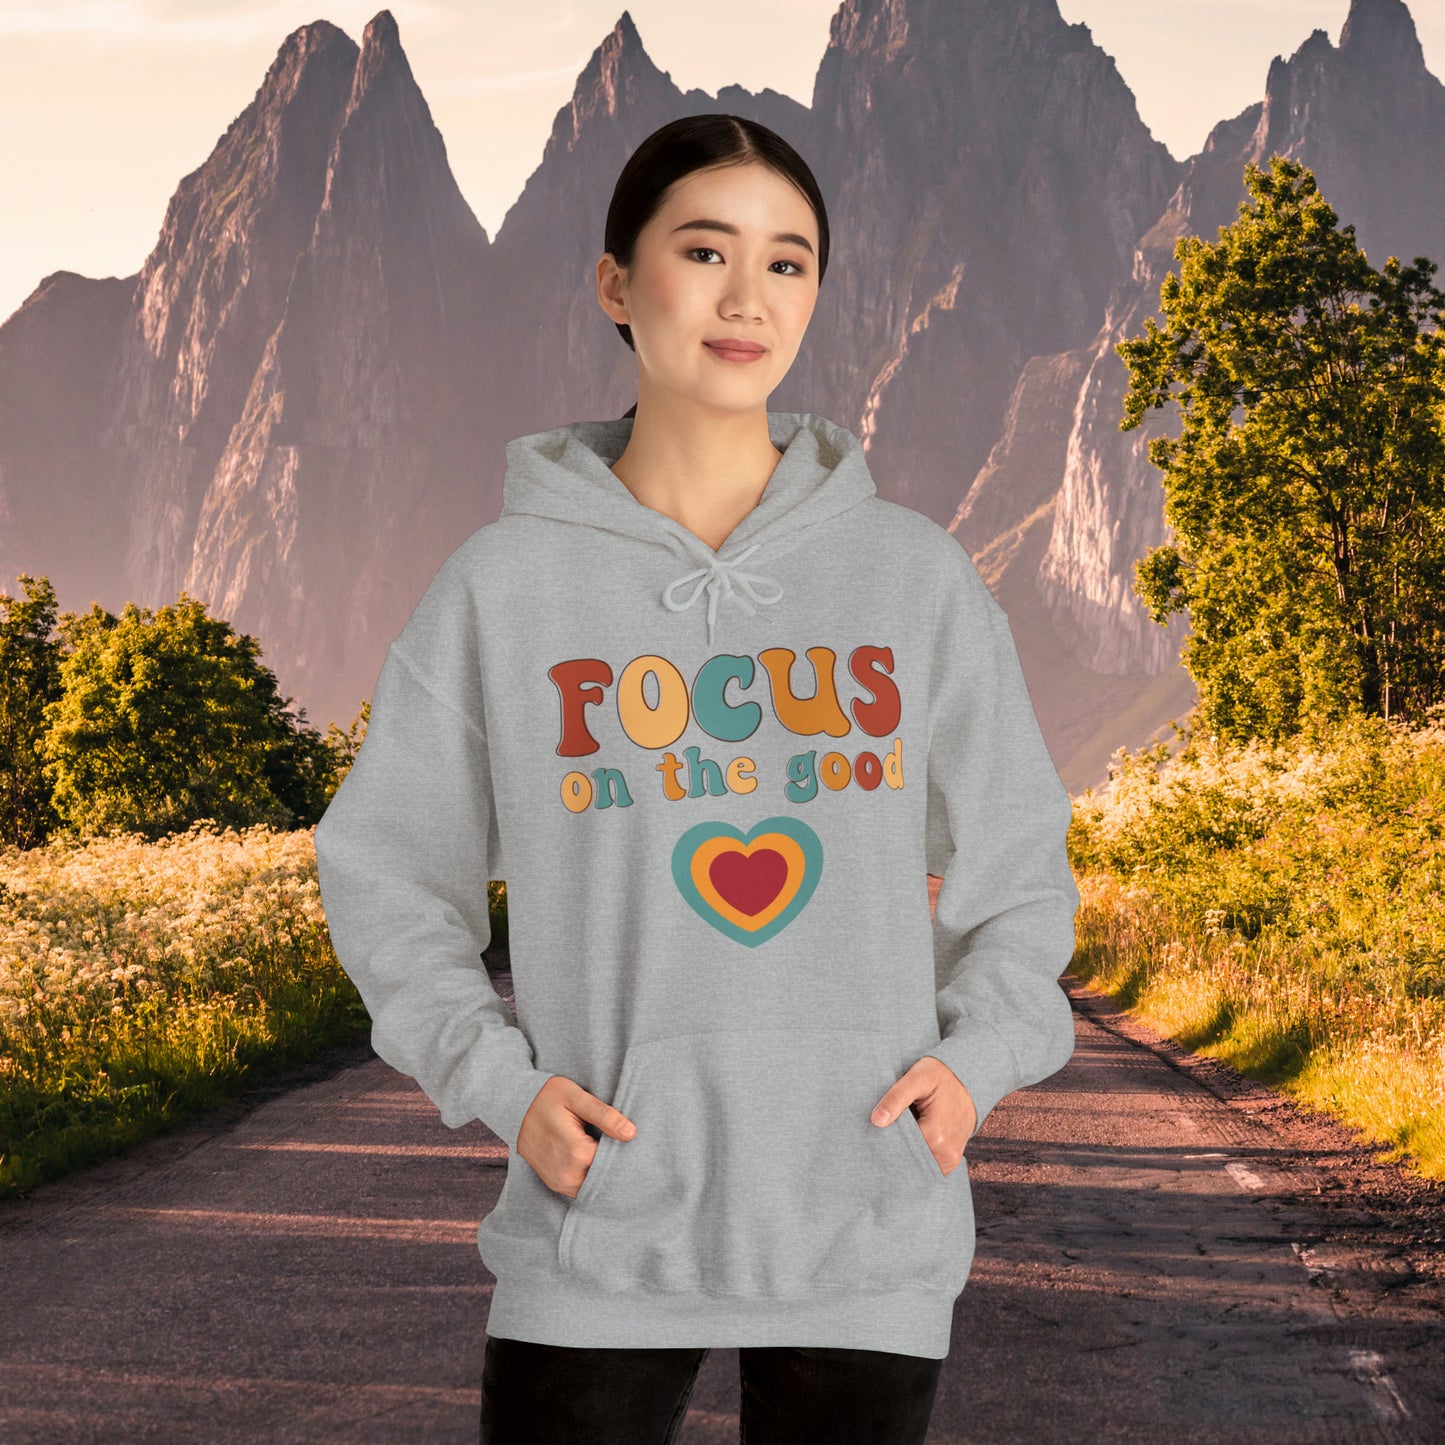 A colorful Focus on the good message on this Unisex Heavy Blend™ Hooded Sweatshirt